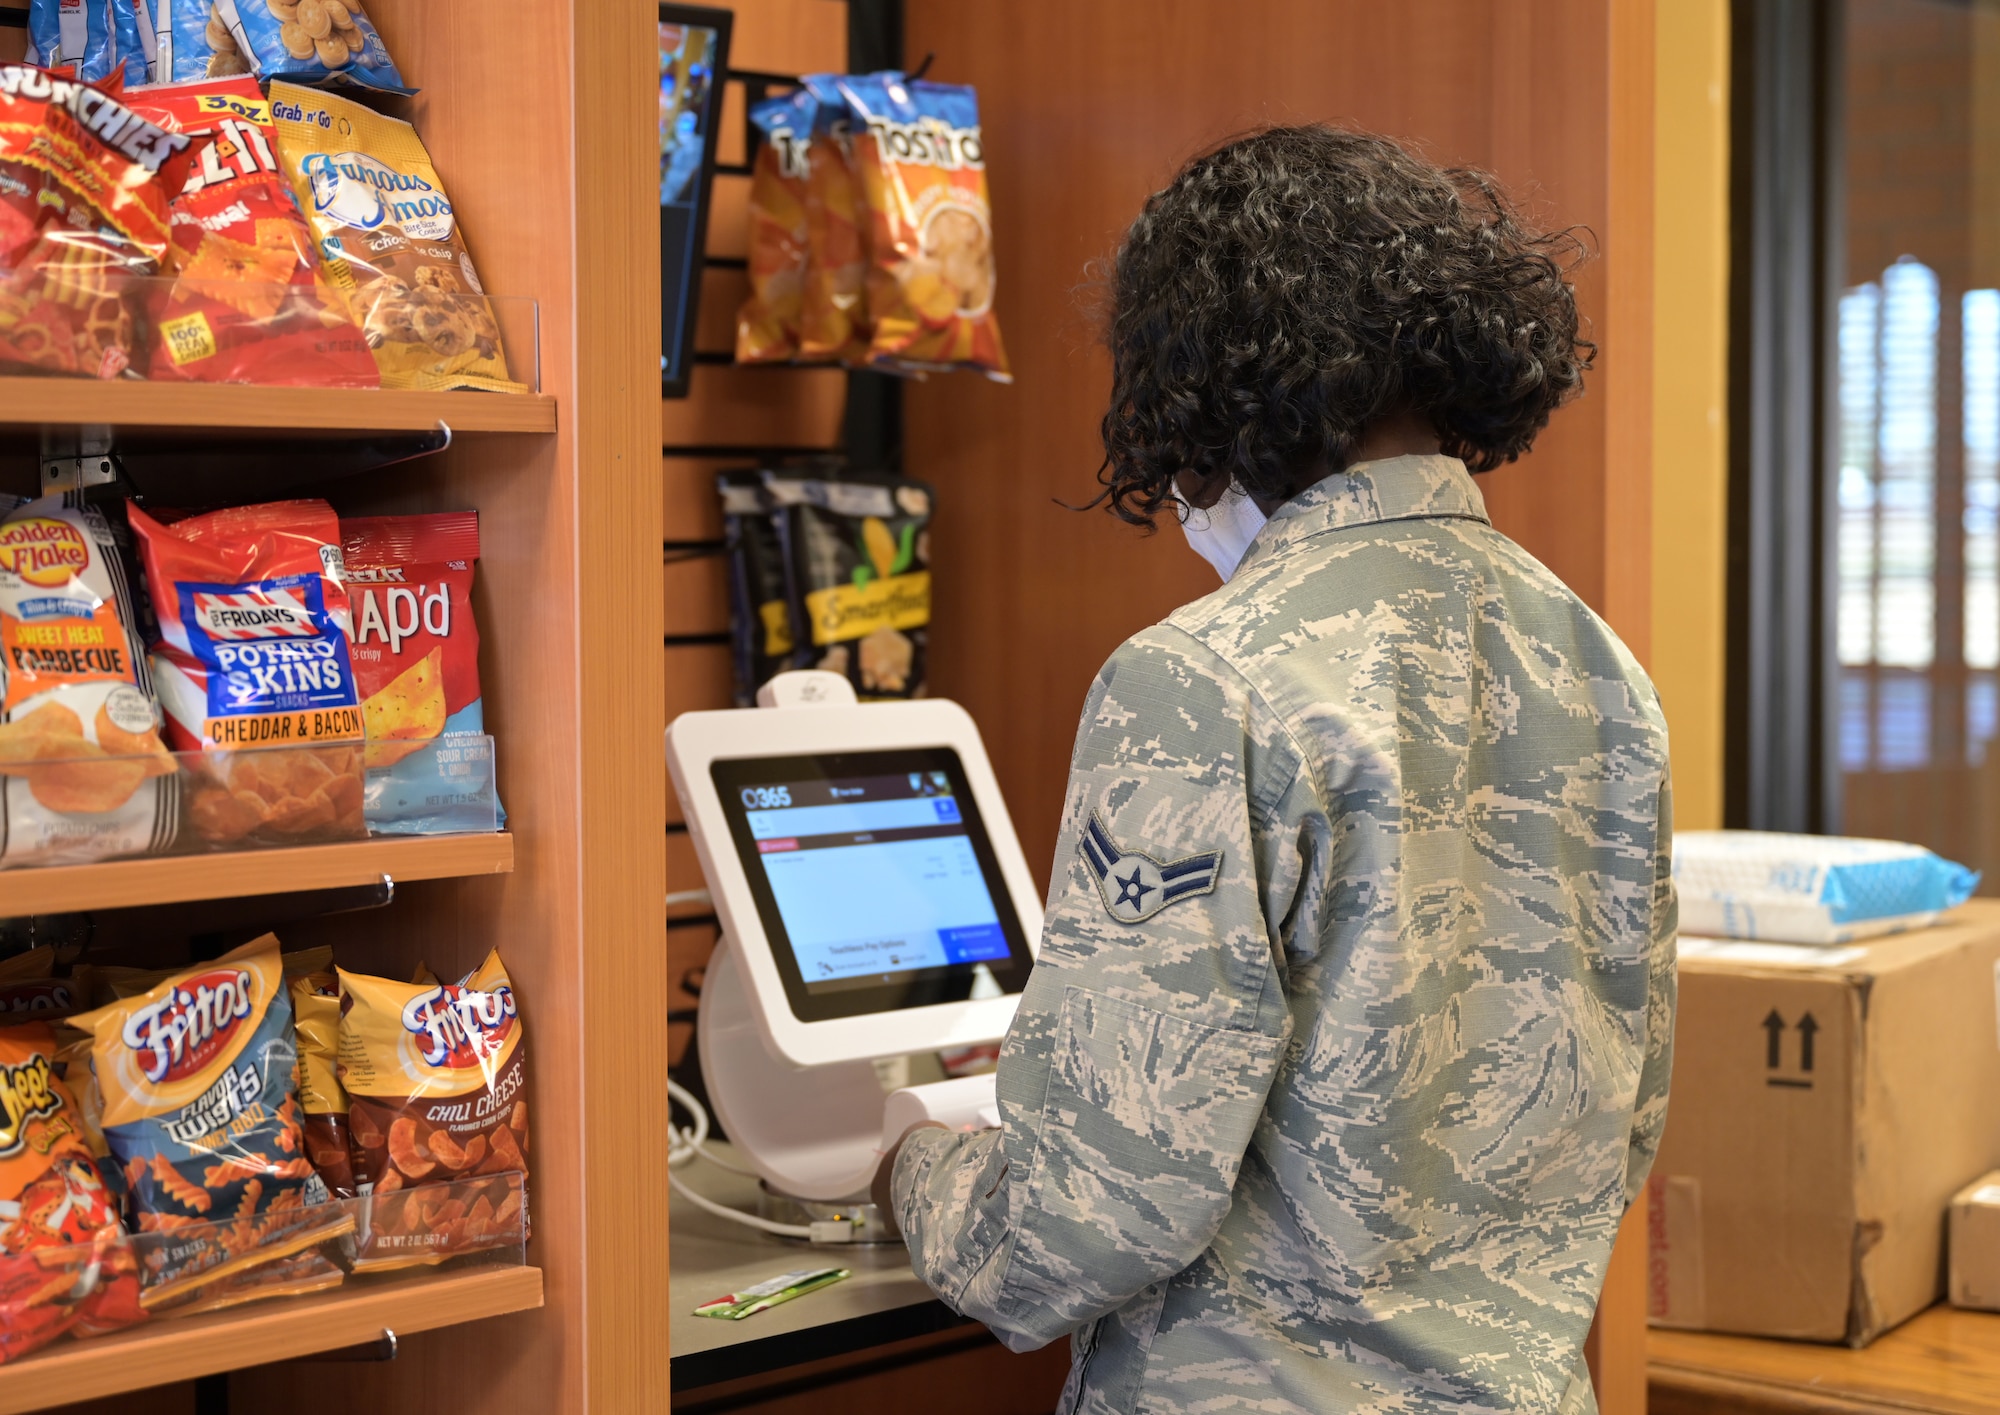 U.S. Air Force A1C Shamiya Brooks, 14th Communications Squadron knowledge management, purchases snacks from a recently installed Nano market inside Montgomery Village, Feb. 23, 2021, on Columbus Air Force Base, Miss. Montgomery Village is a common area provided to Airmen living in Unaccompanied Enlisted Housing, which consist of not only the new market, but also a small theater set-up, game room, music room, and study areas. (U.S. Air Force photo by Airman 1st Class Jessica Haynie)